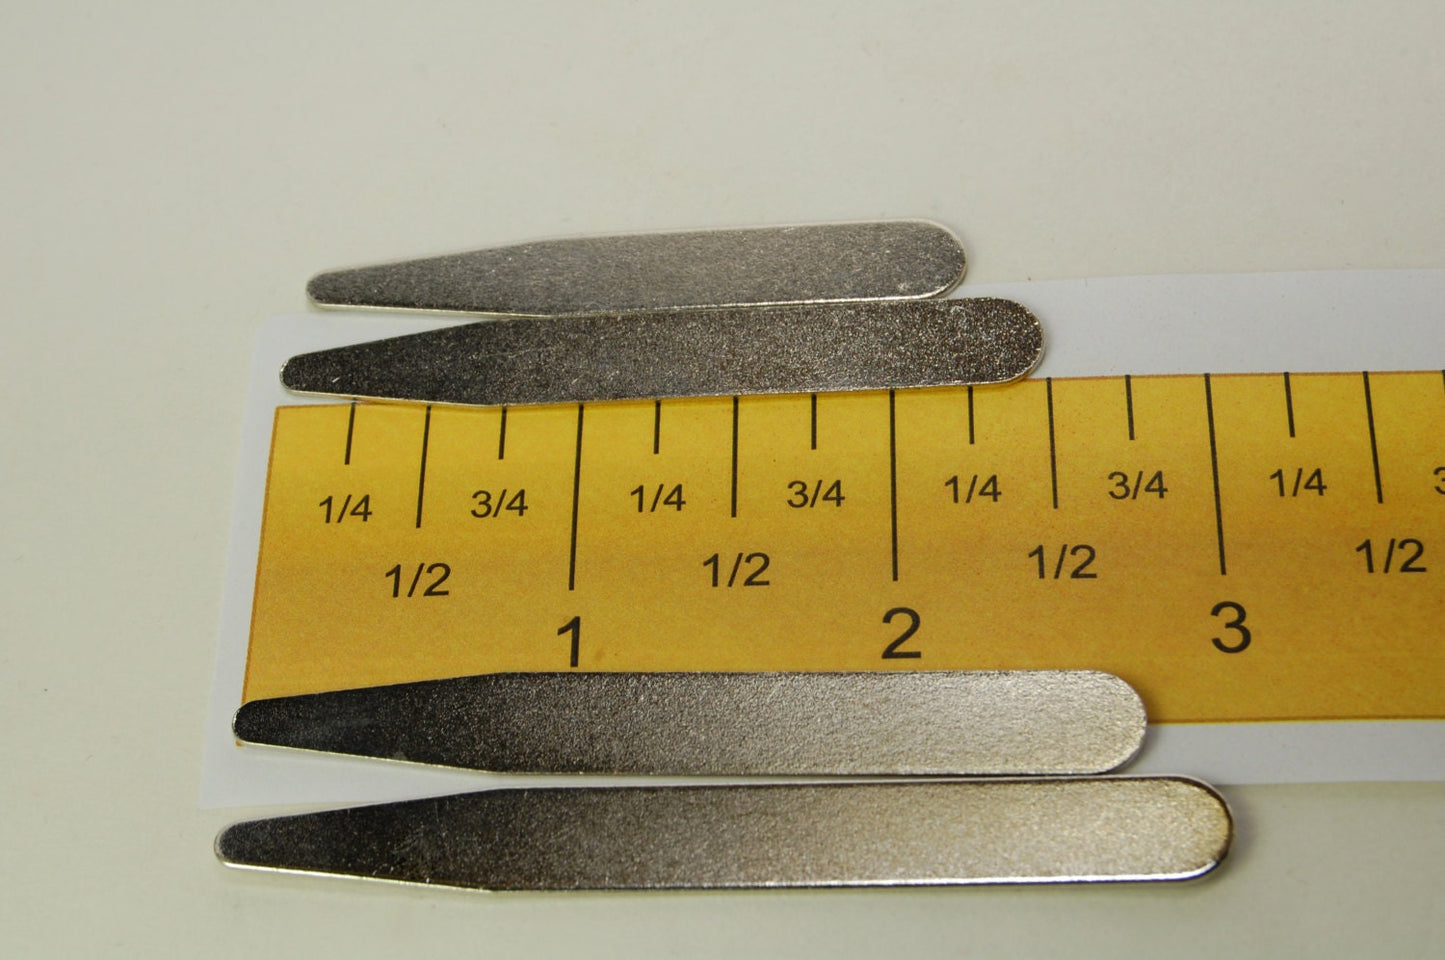 Set of 10 matte metal COLLAR STAYS / TIPS (20 pieces) - 5 sizes: 2 1/4", 2 1/2", 2 3/4, 3" long x 3/8" wide + add storage box